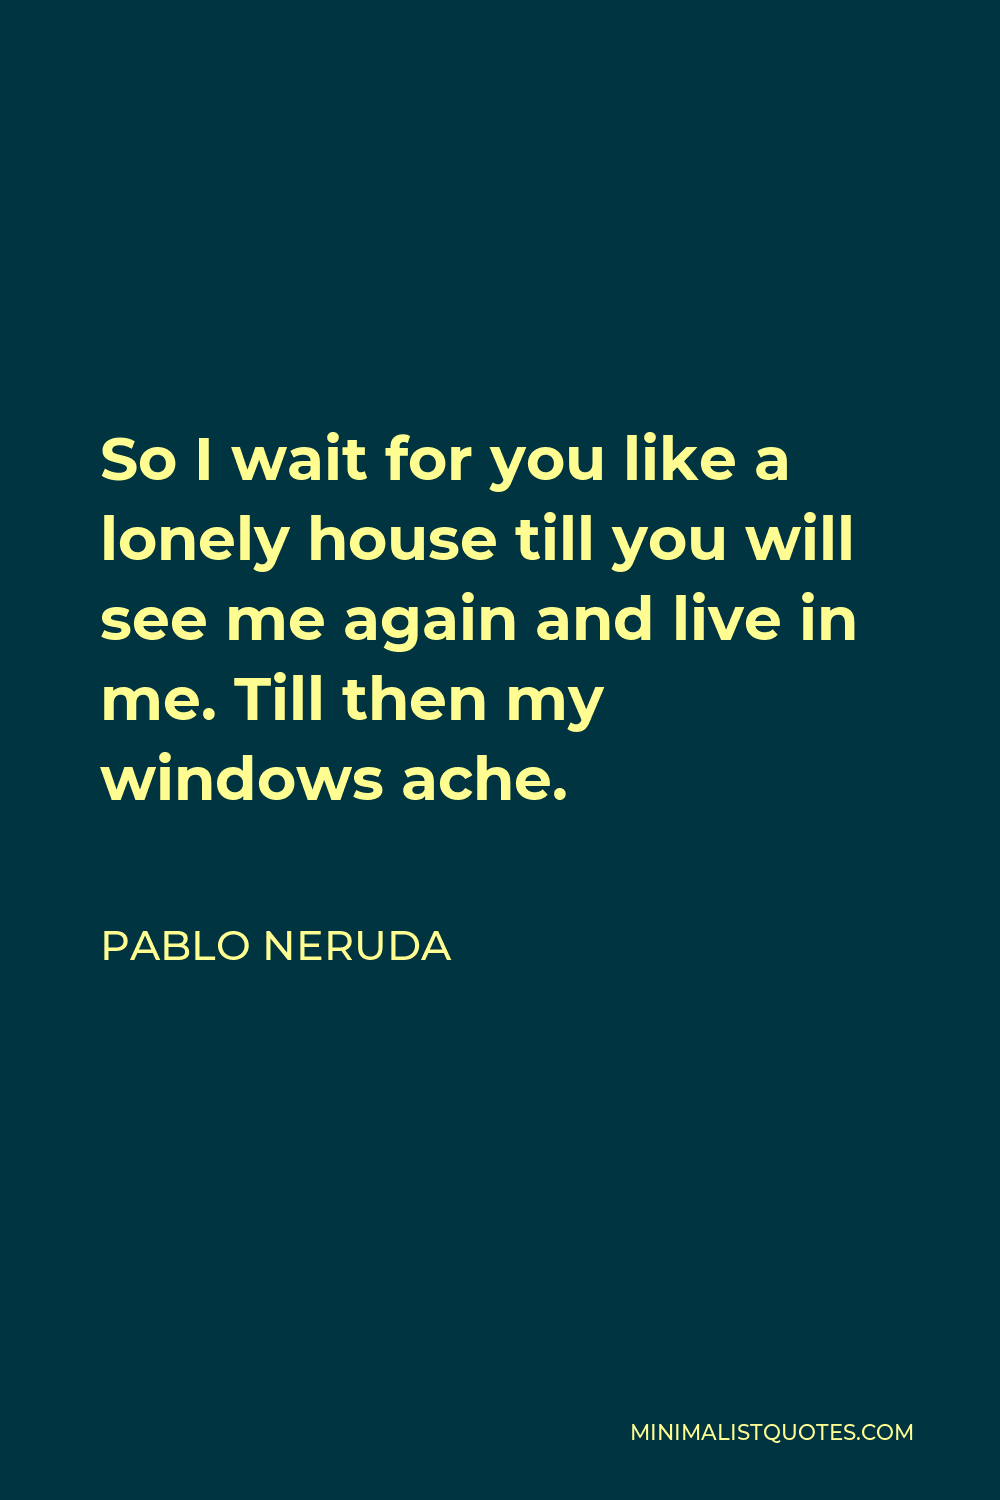 Pablo Neruda Quote: So I wait for you like a lonely house till you will ...